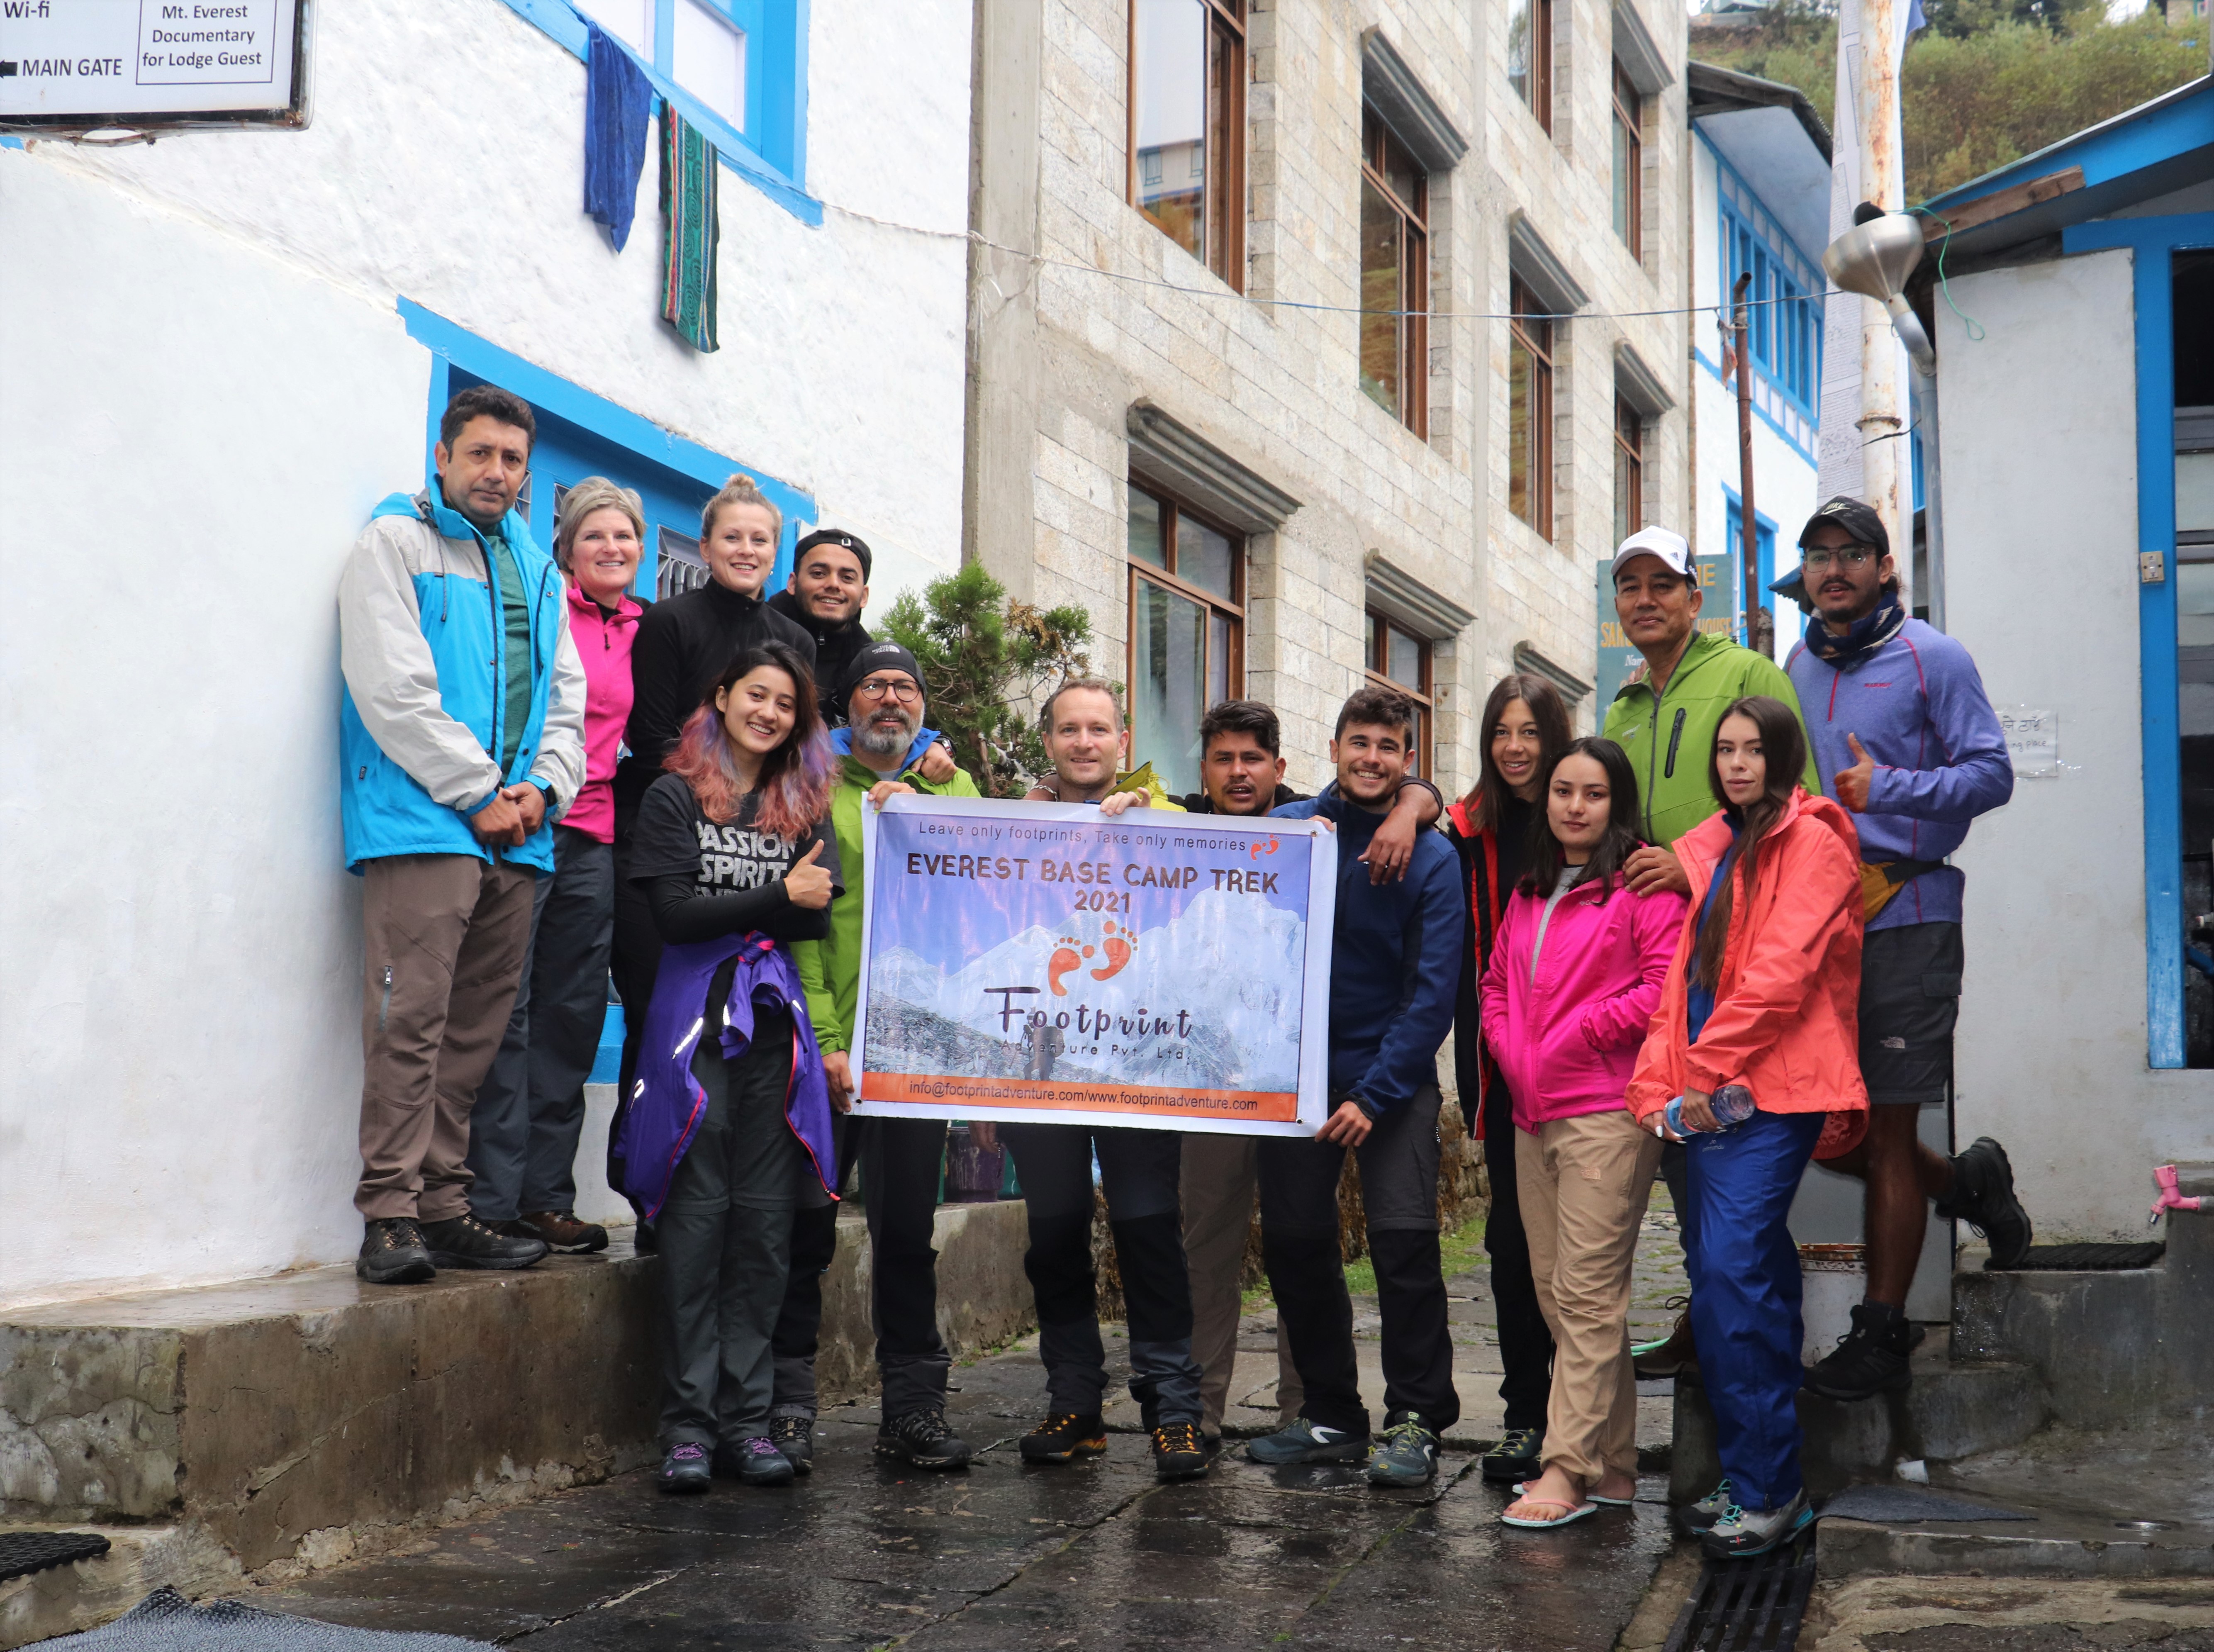 Group of smiling faces holding the banner of "Footprint Adventure" at Namche Bazar on Everest Base Camp Trek